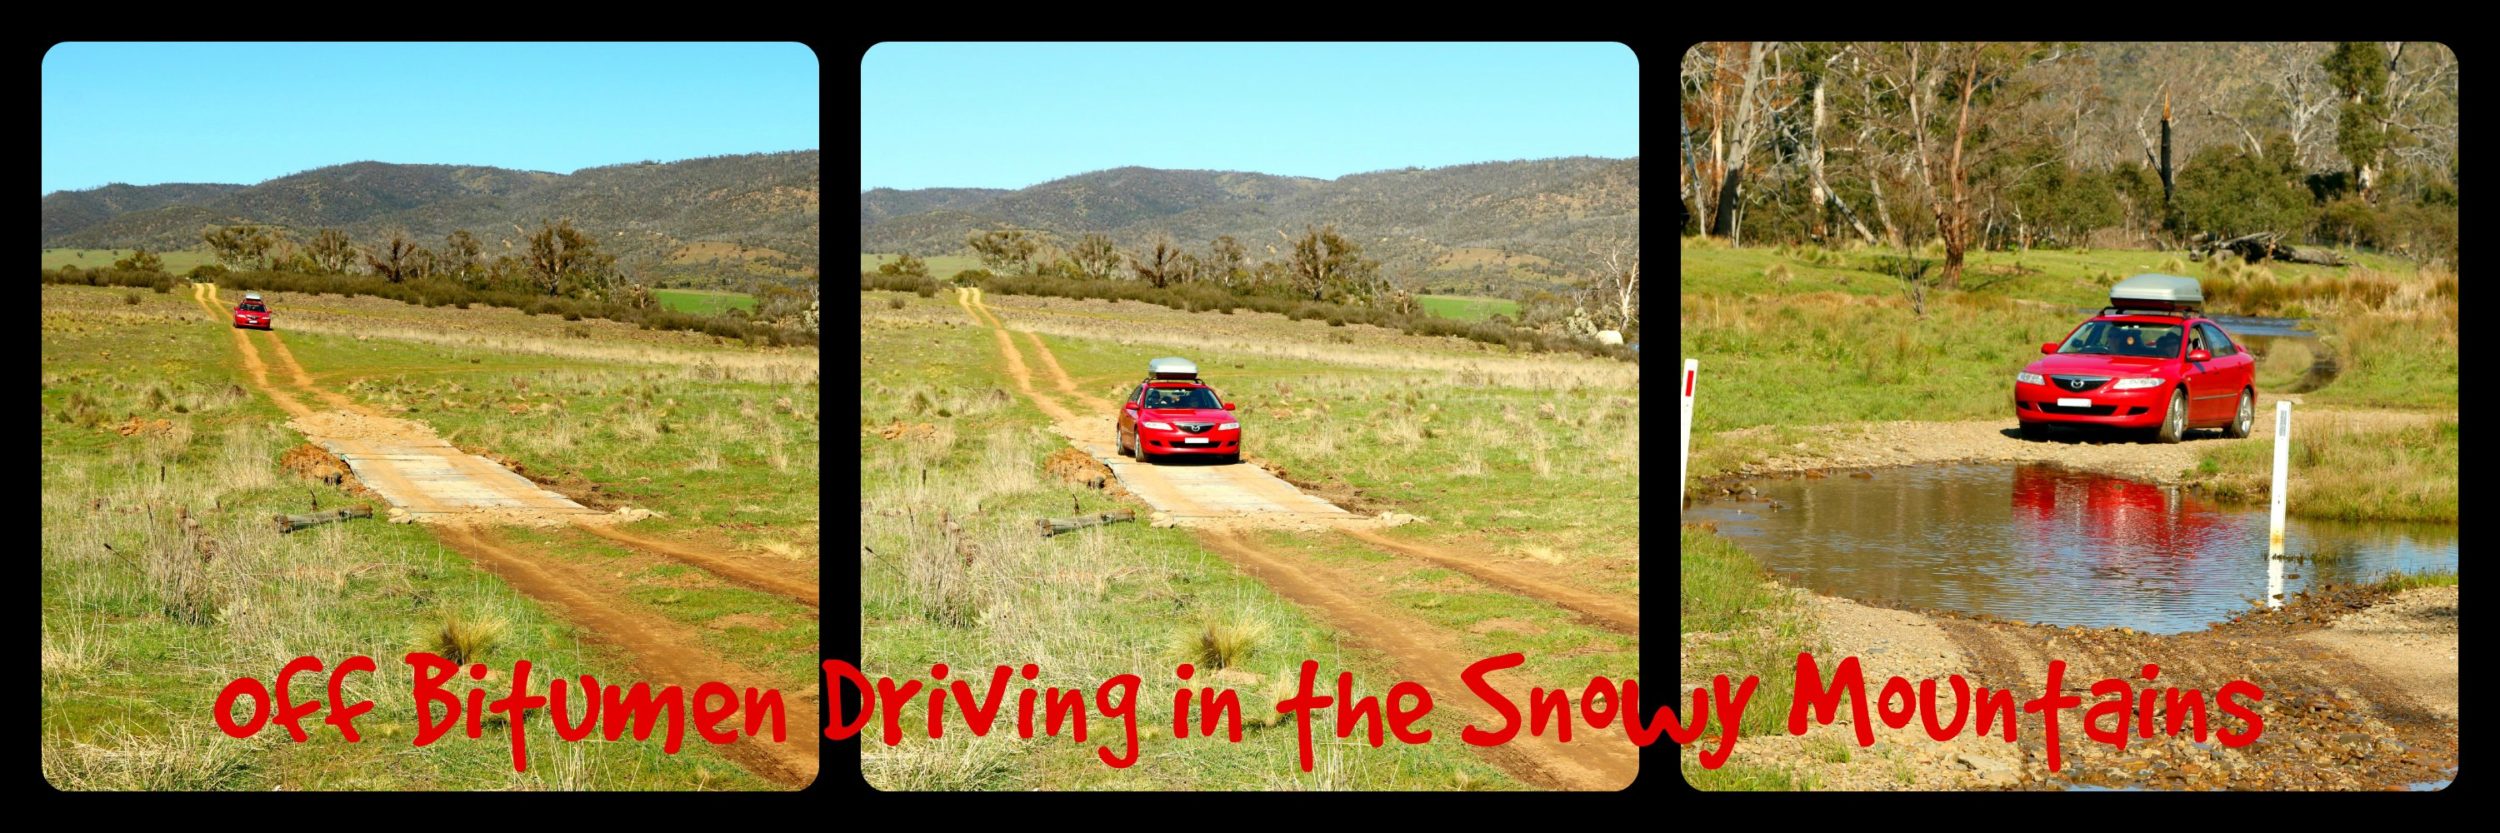 Off Bitumen Driving in the Snowy Mountains, Australia